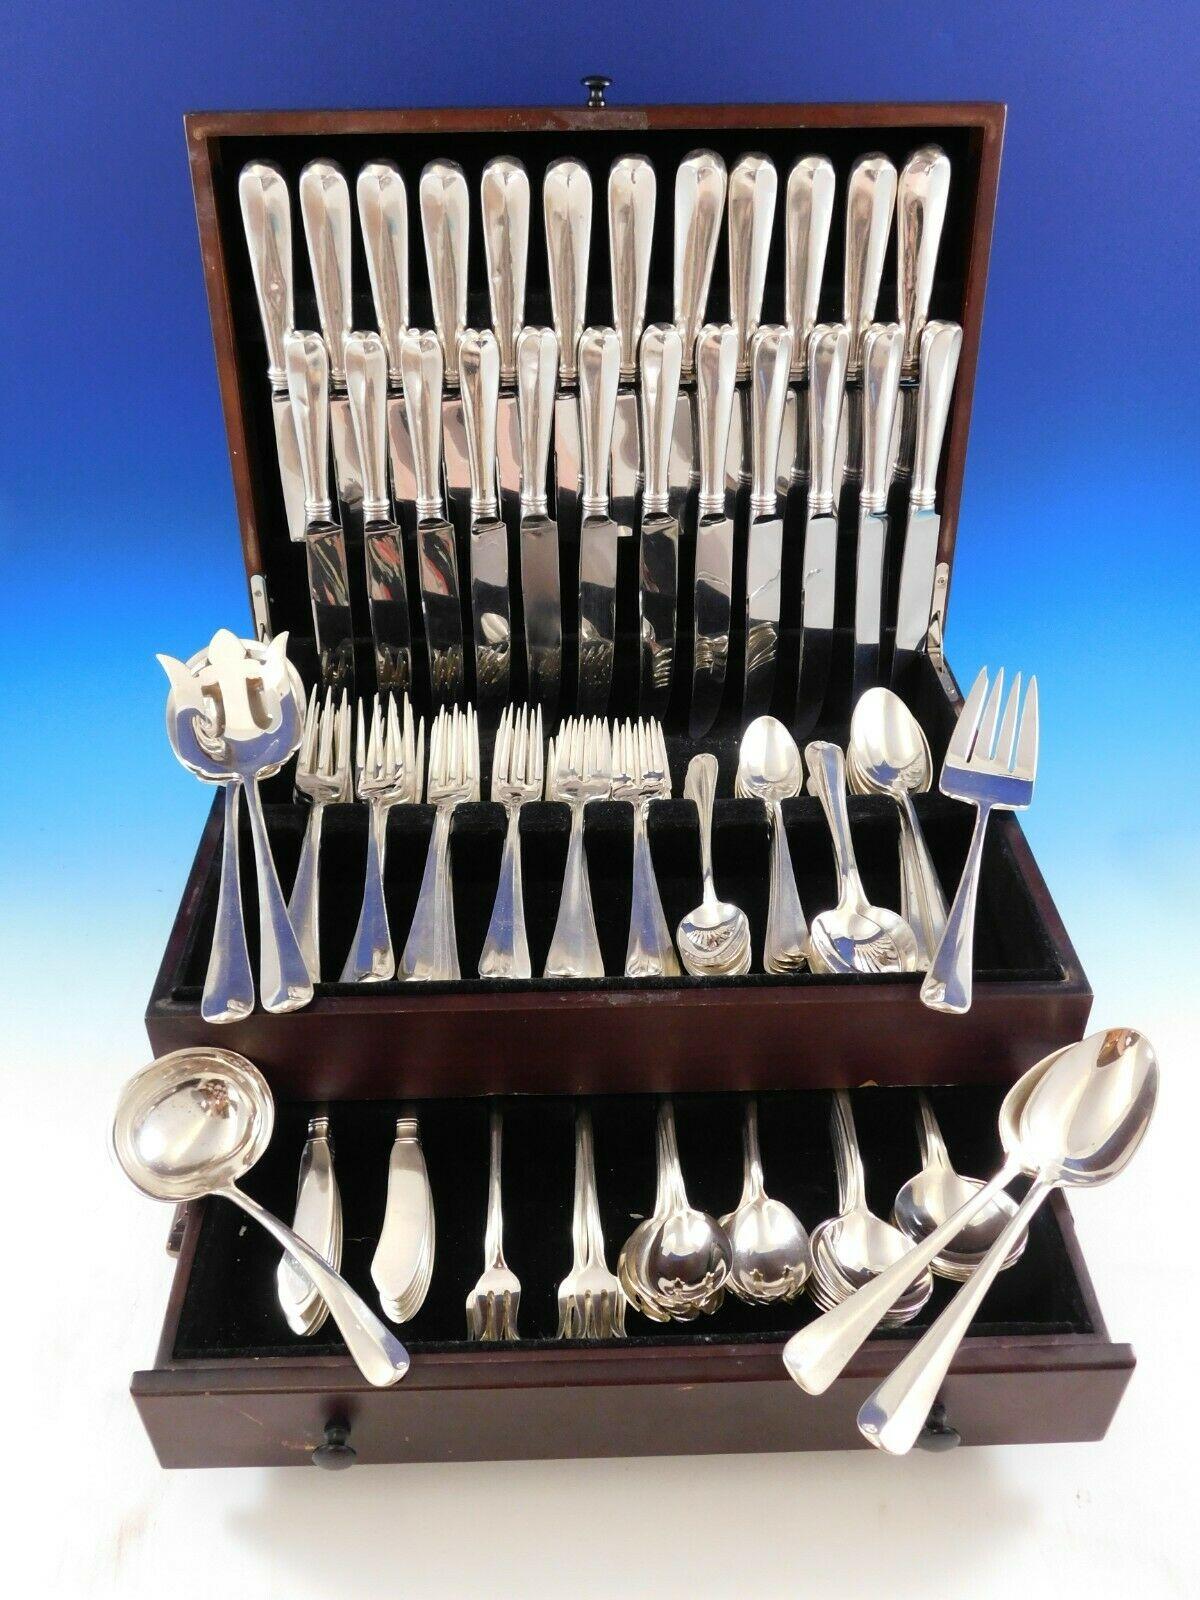 Monumental Rattail antique by Dominick and Haff sterling silver flatware set - 138 pieces. This set includes:
 
12 dinner size knives, 9 7/8